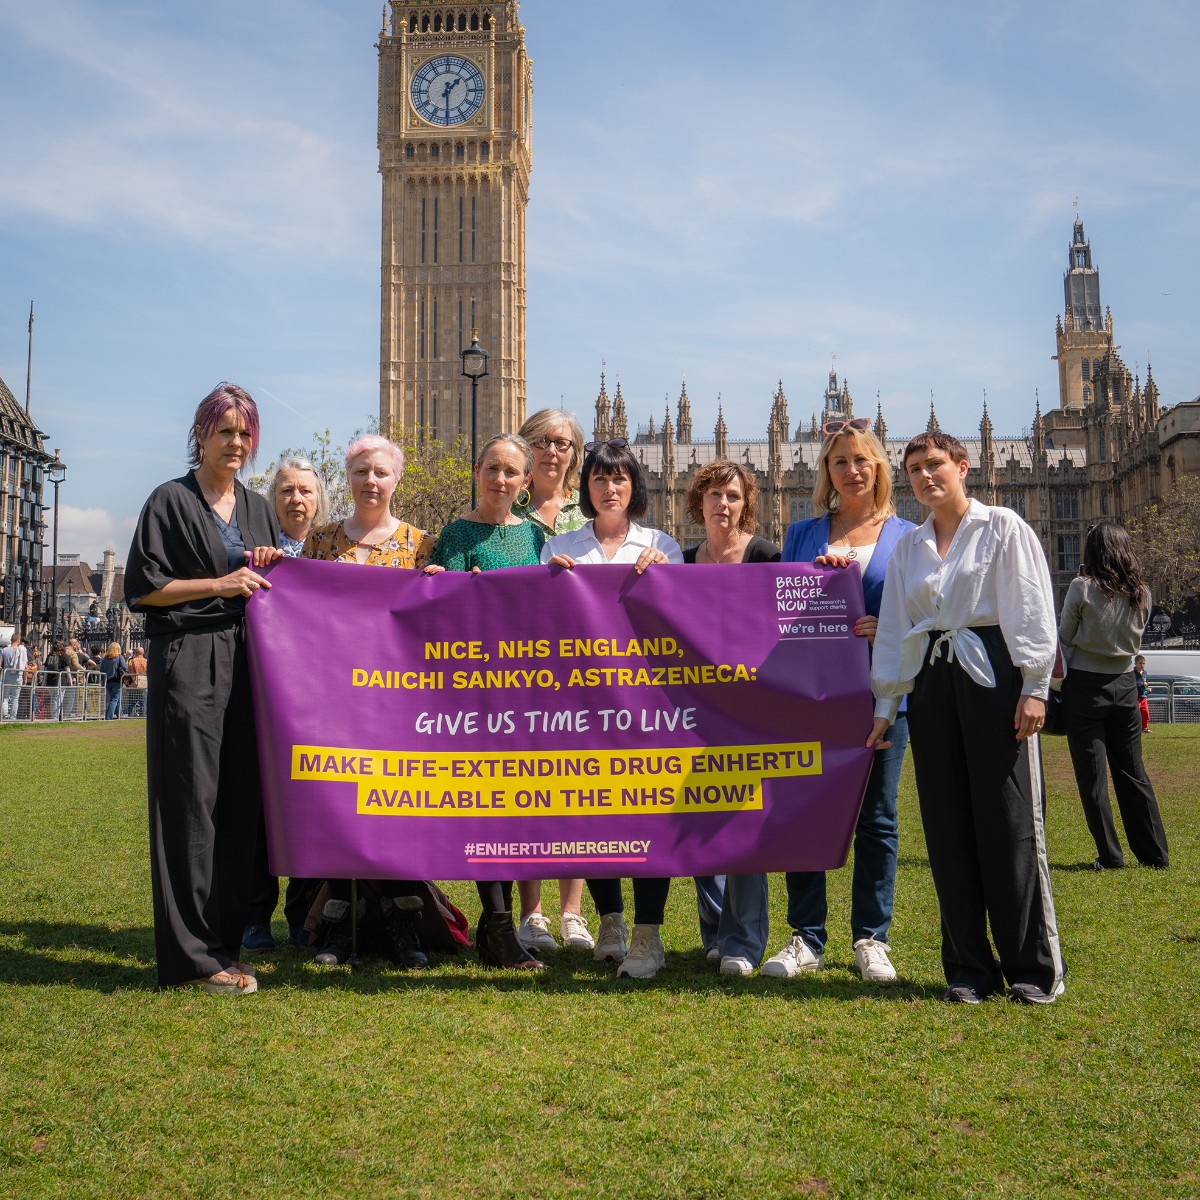 A huge thank you to the incredible women who joined us in parliament today. Their message to @NHSEngland, @NICEComms, @DaiichiSankyoUK and @ASTRAZENECAUK was clear: 'Give us more time to live. Make #Enhertu available on the NHS now.”